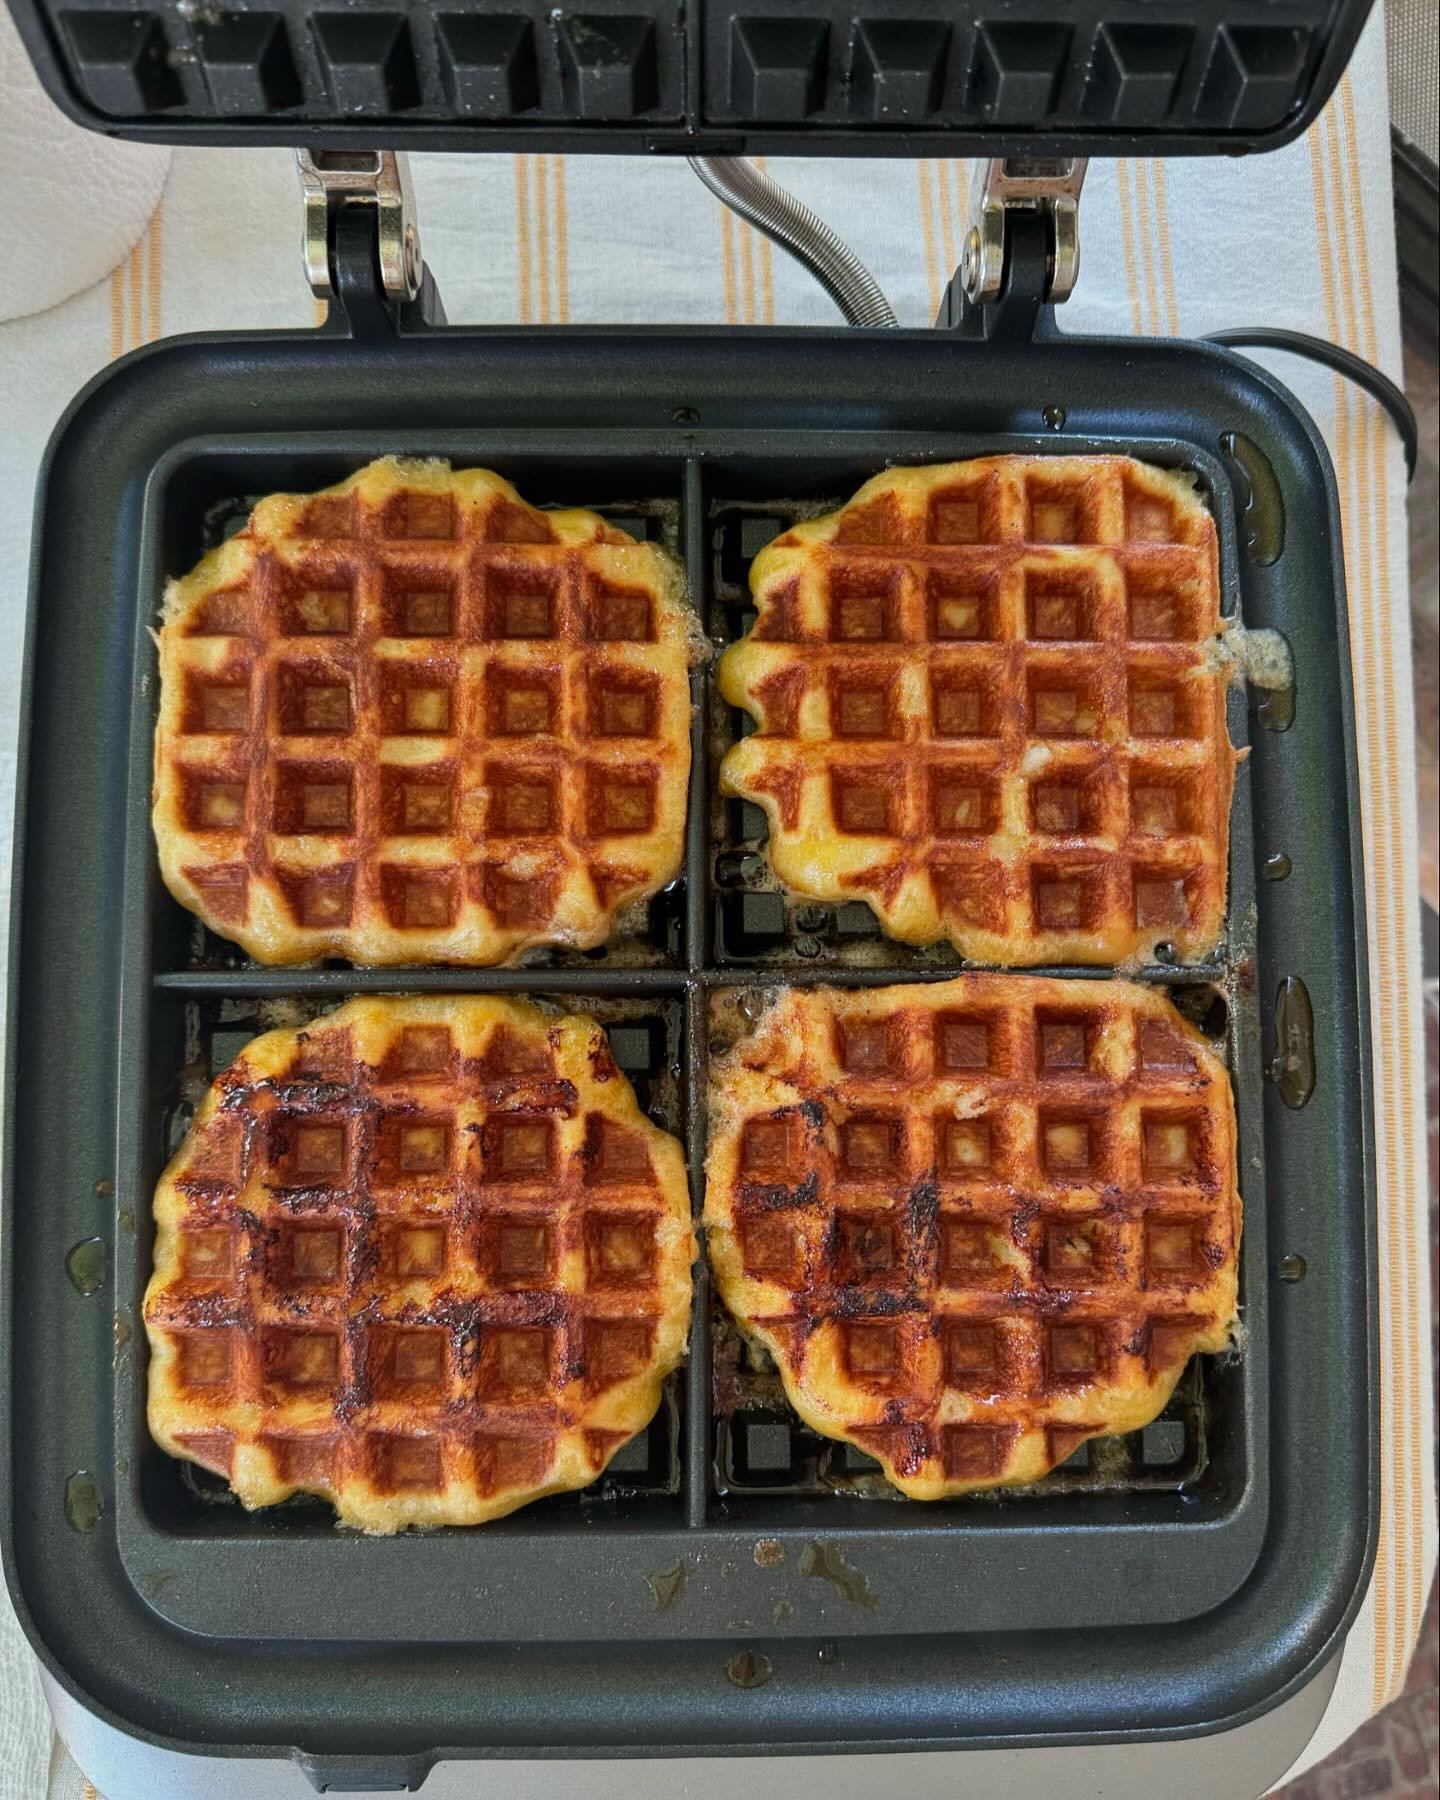 Last week we tested out our Belgian Liege waffles and they were delicious and decadent! The smell of these cooking is both nostalgic to Brian (head baker/owner) and irresistible to passers by. They will definitely be on the menu when we open 🧇